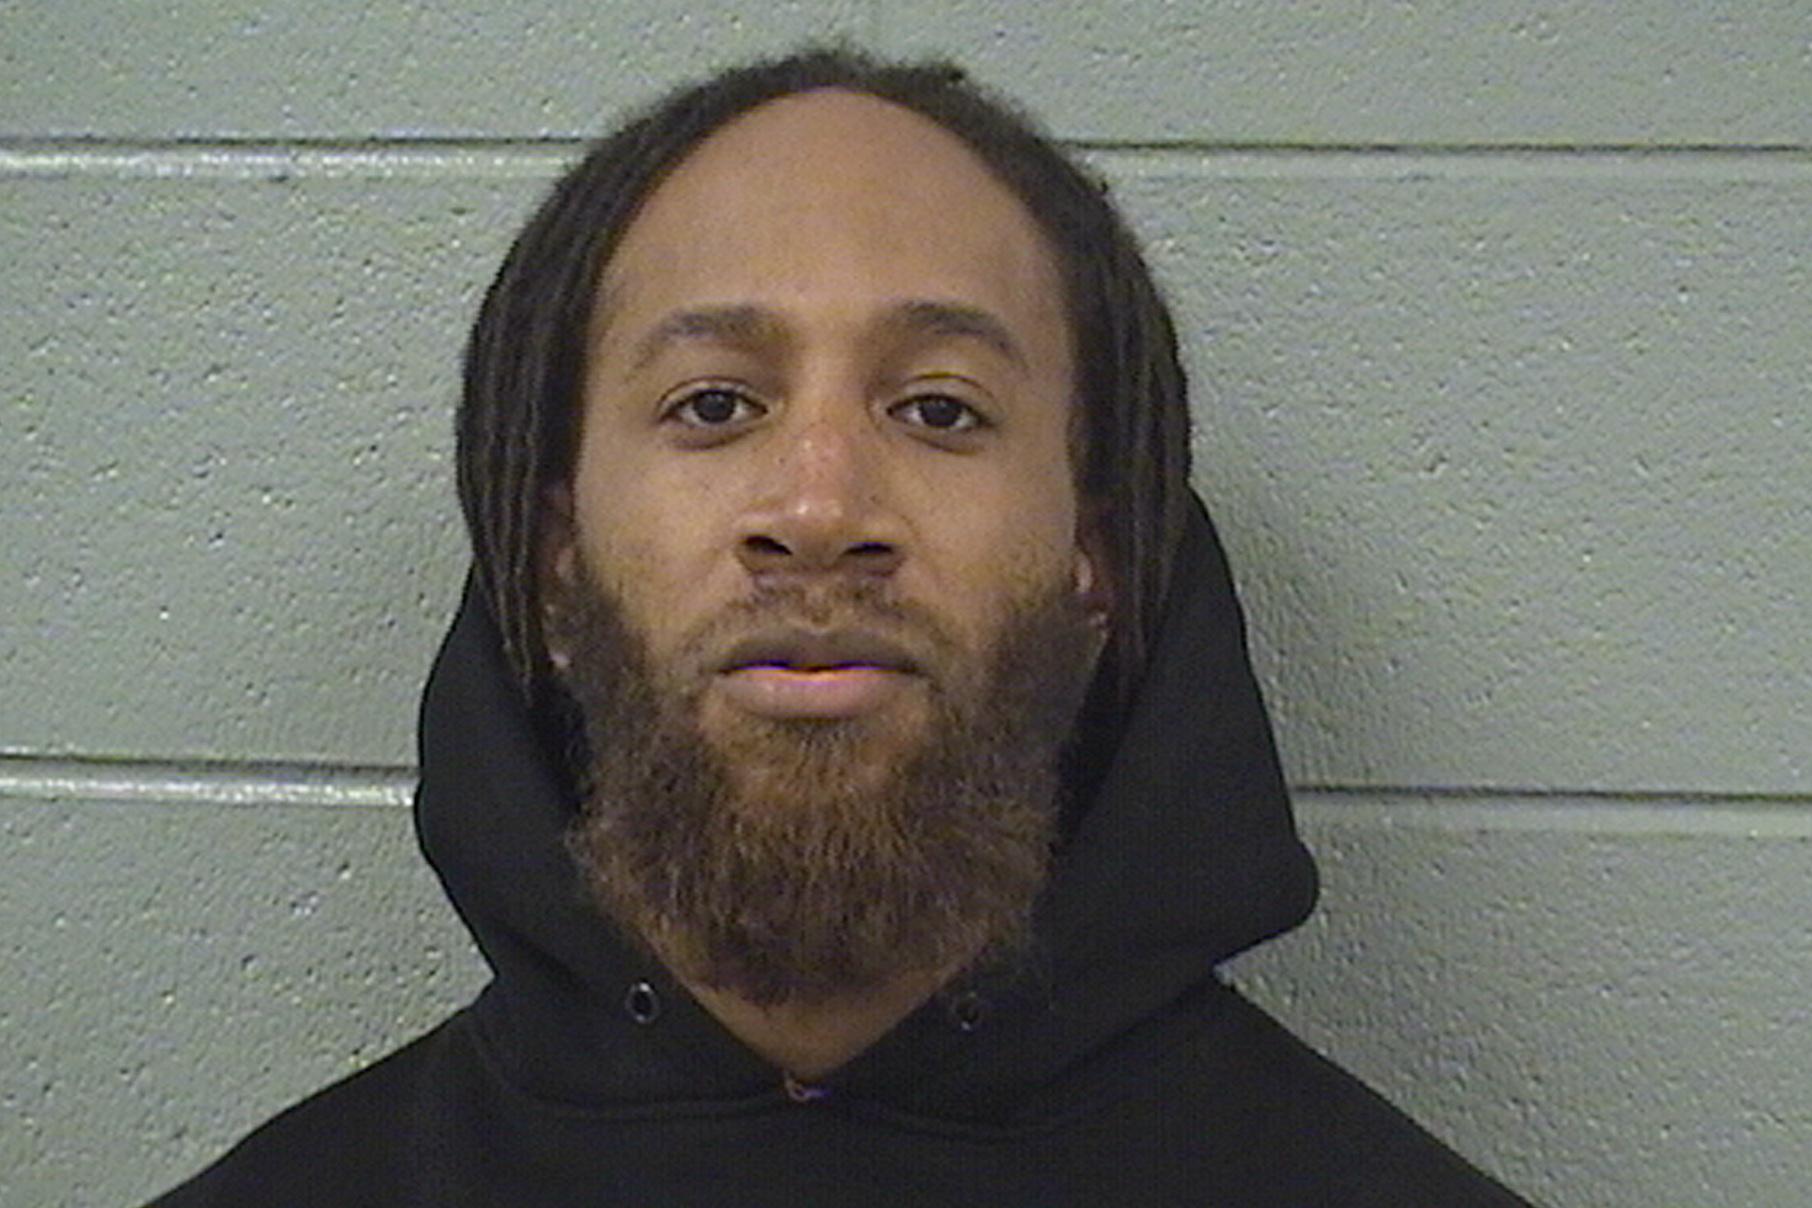 In this photo provided by the Cook County Sheriff’s Office, Michael Haywood is pictured in a booking photo dated Feb. 13, 2019, in Chicago. (Cook County Sheriff’s Office via AP)